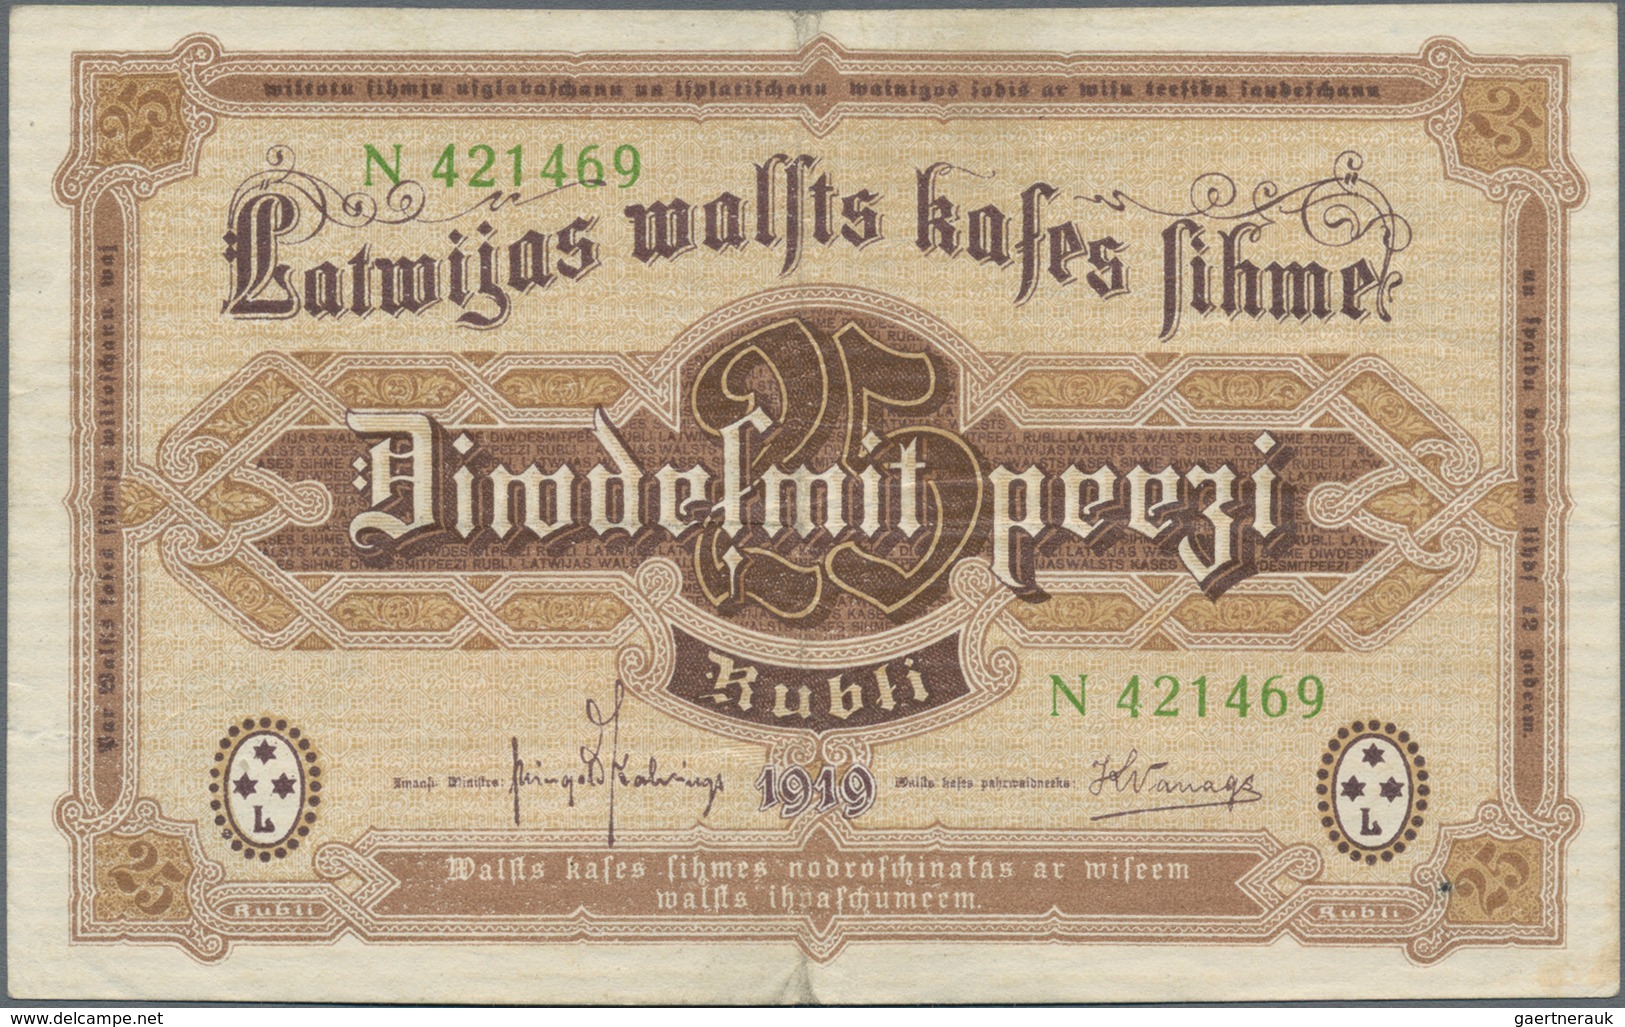 Latvia / Lettland: Highly rare set with 16 banknotes Latvia and Lithuania comprising 50 Centu 1922,